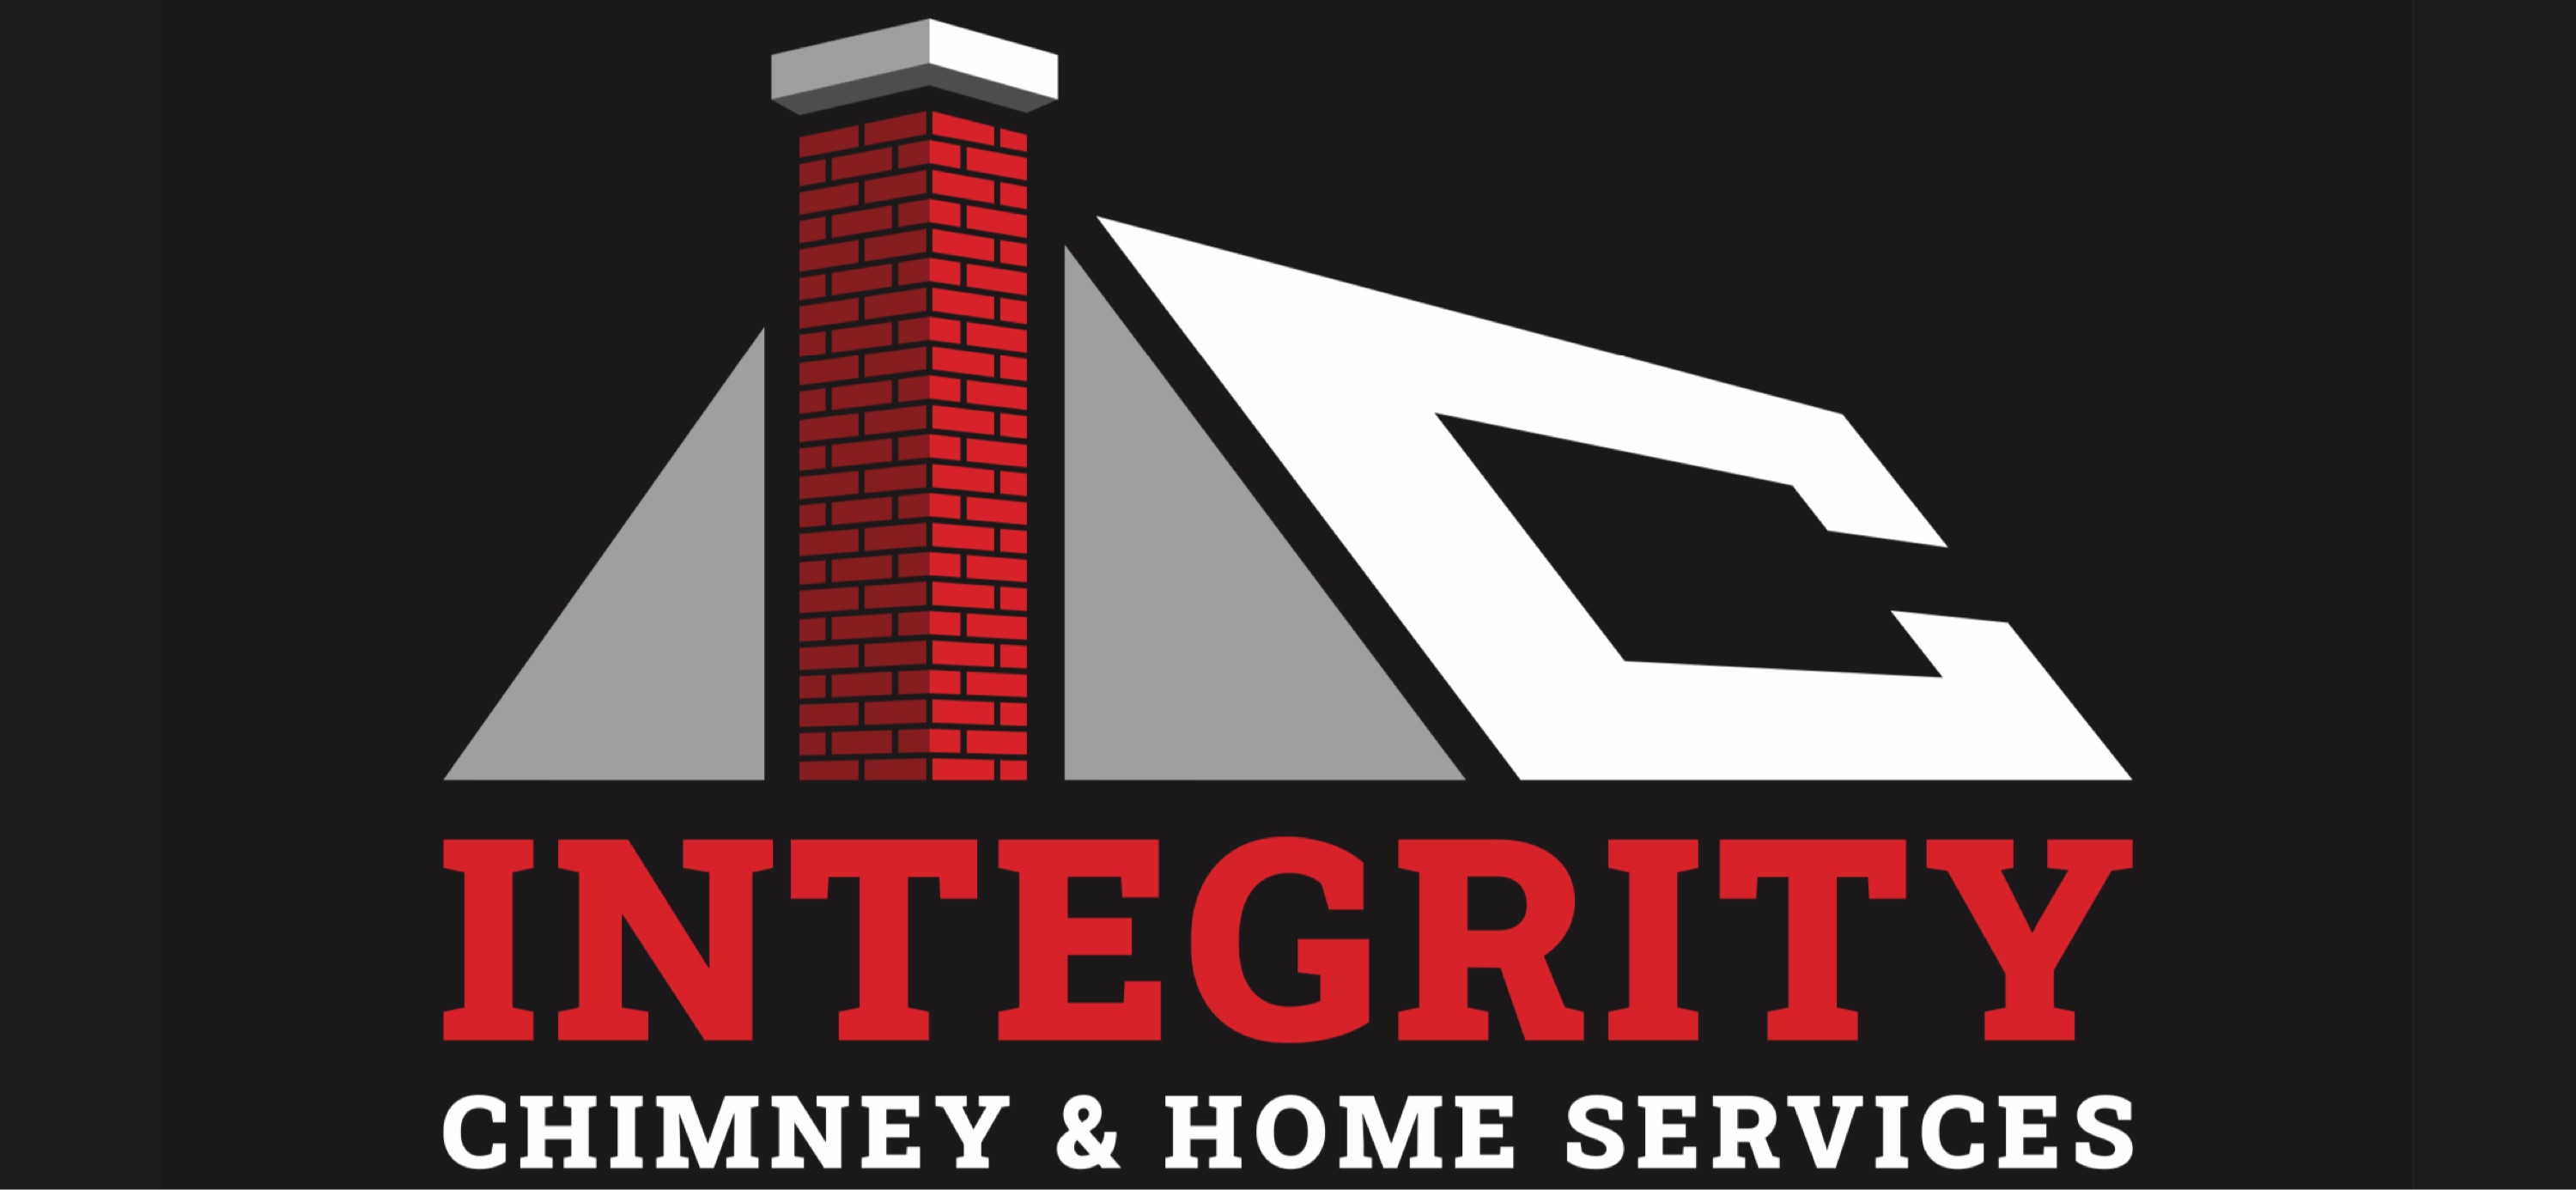 Integrity Chimney & Home Services Logo